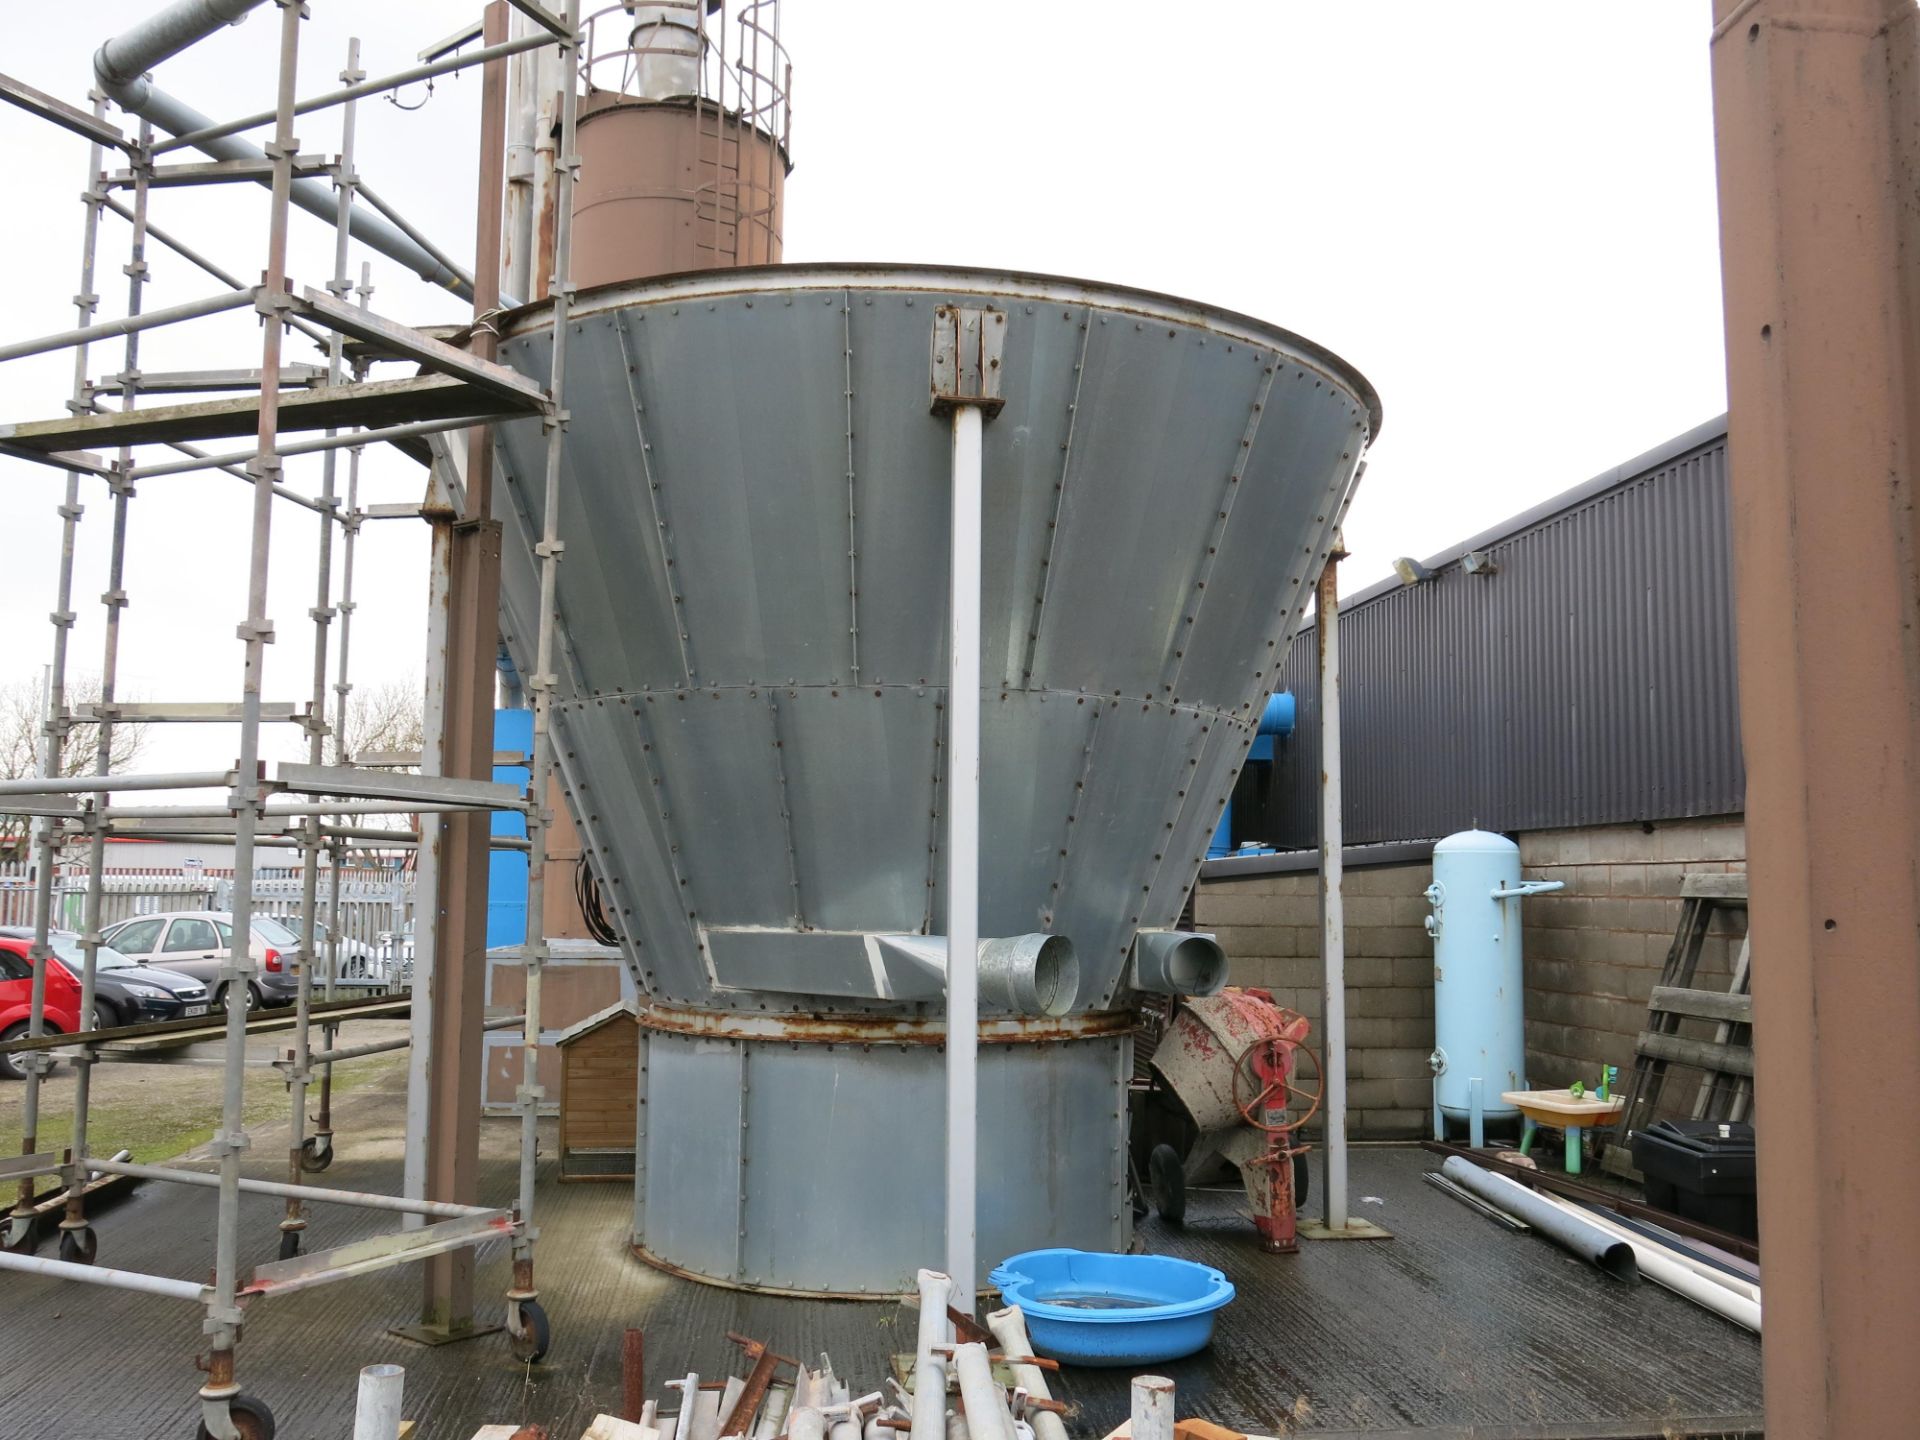 * Needle Bag Filter Dust Extraction Plant. No motor. Buyer to remove and load. Removal will be